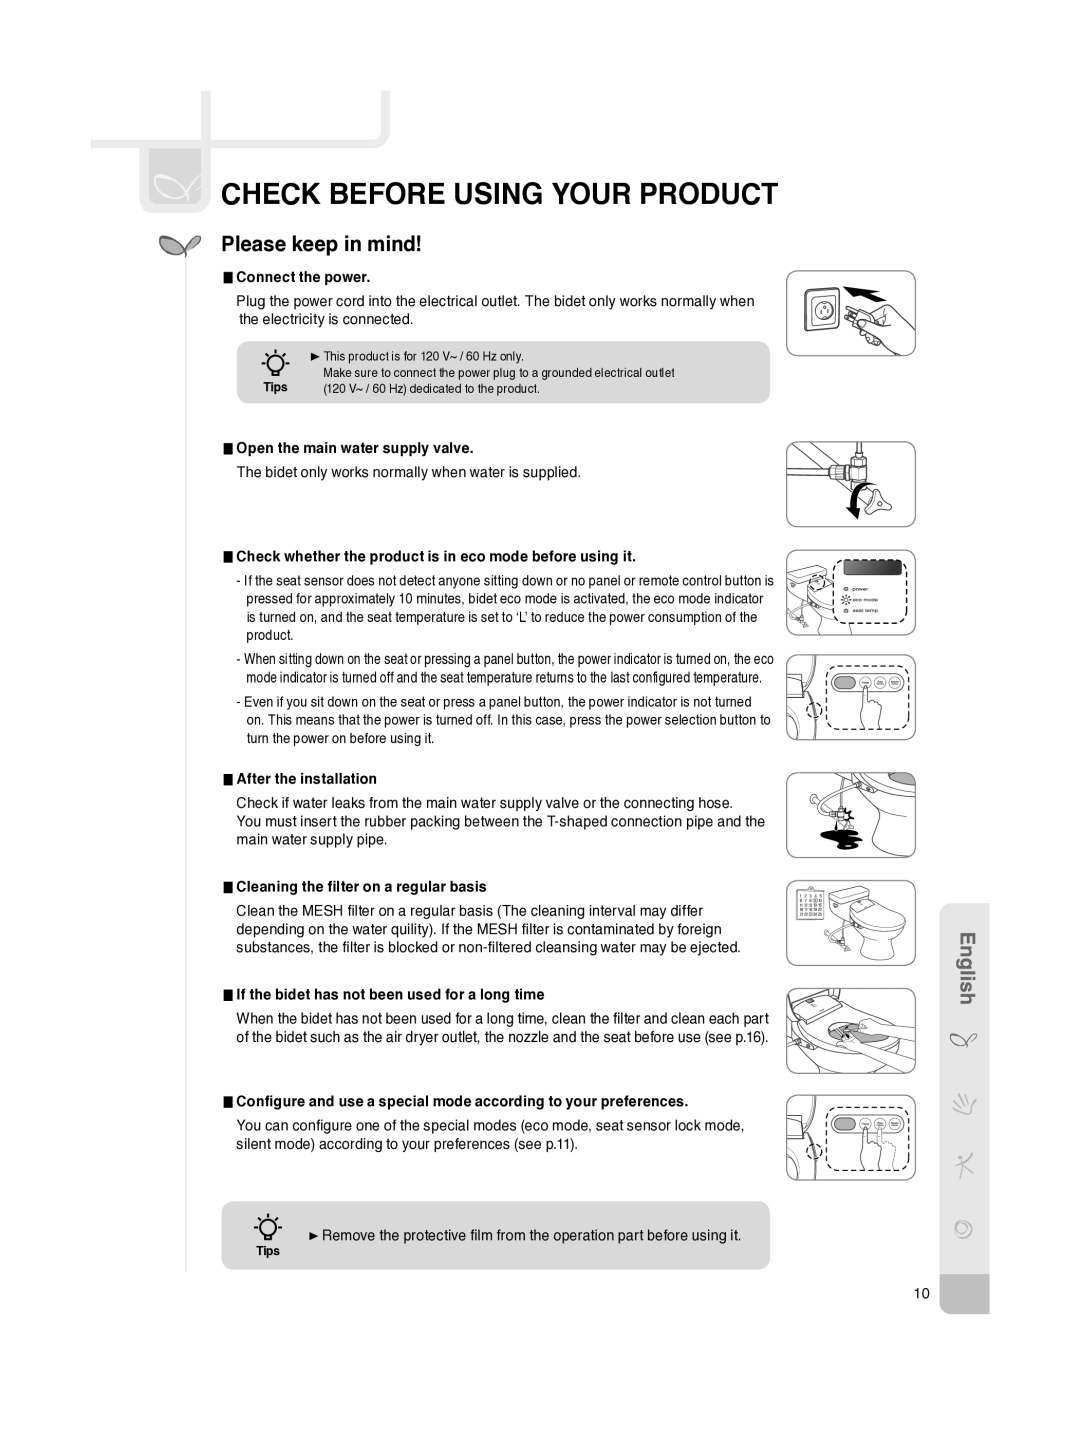 Coway BA13-AR, BA13-BE, BA13-AE, BA13-BR manual Check before using your product, Please keep in mind 